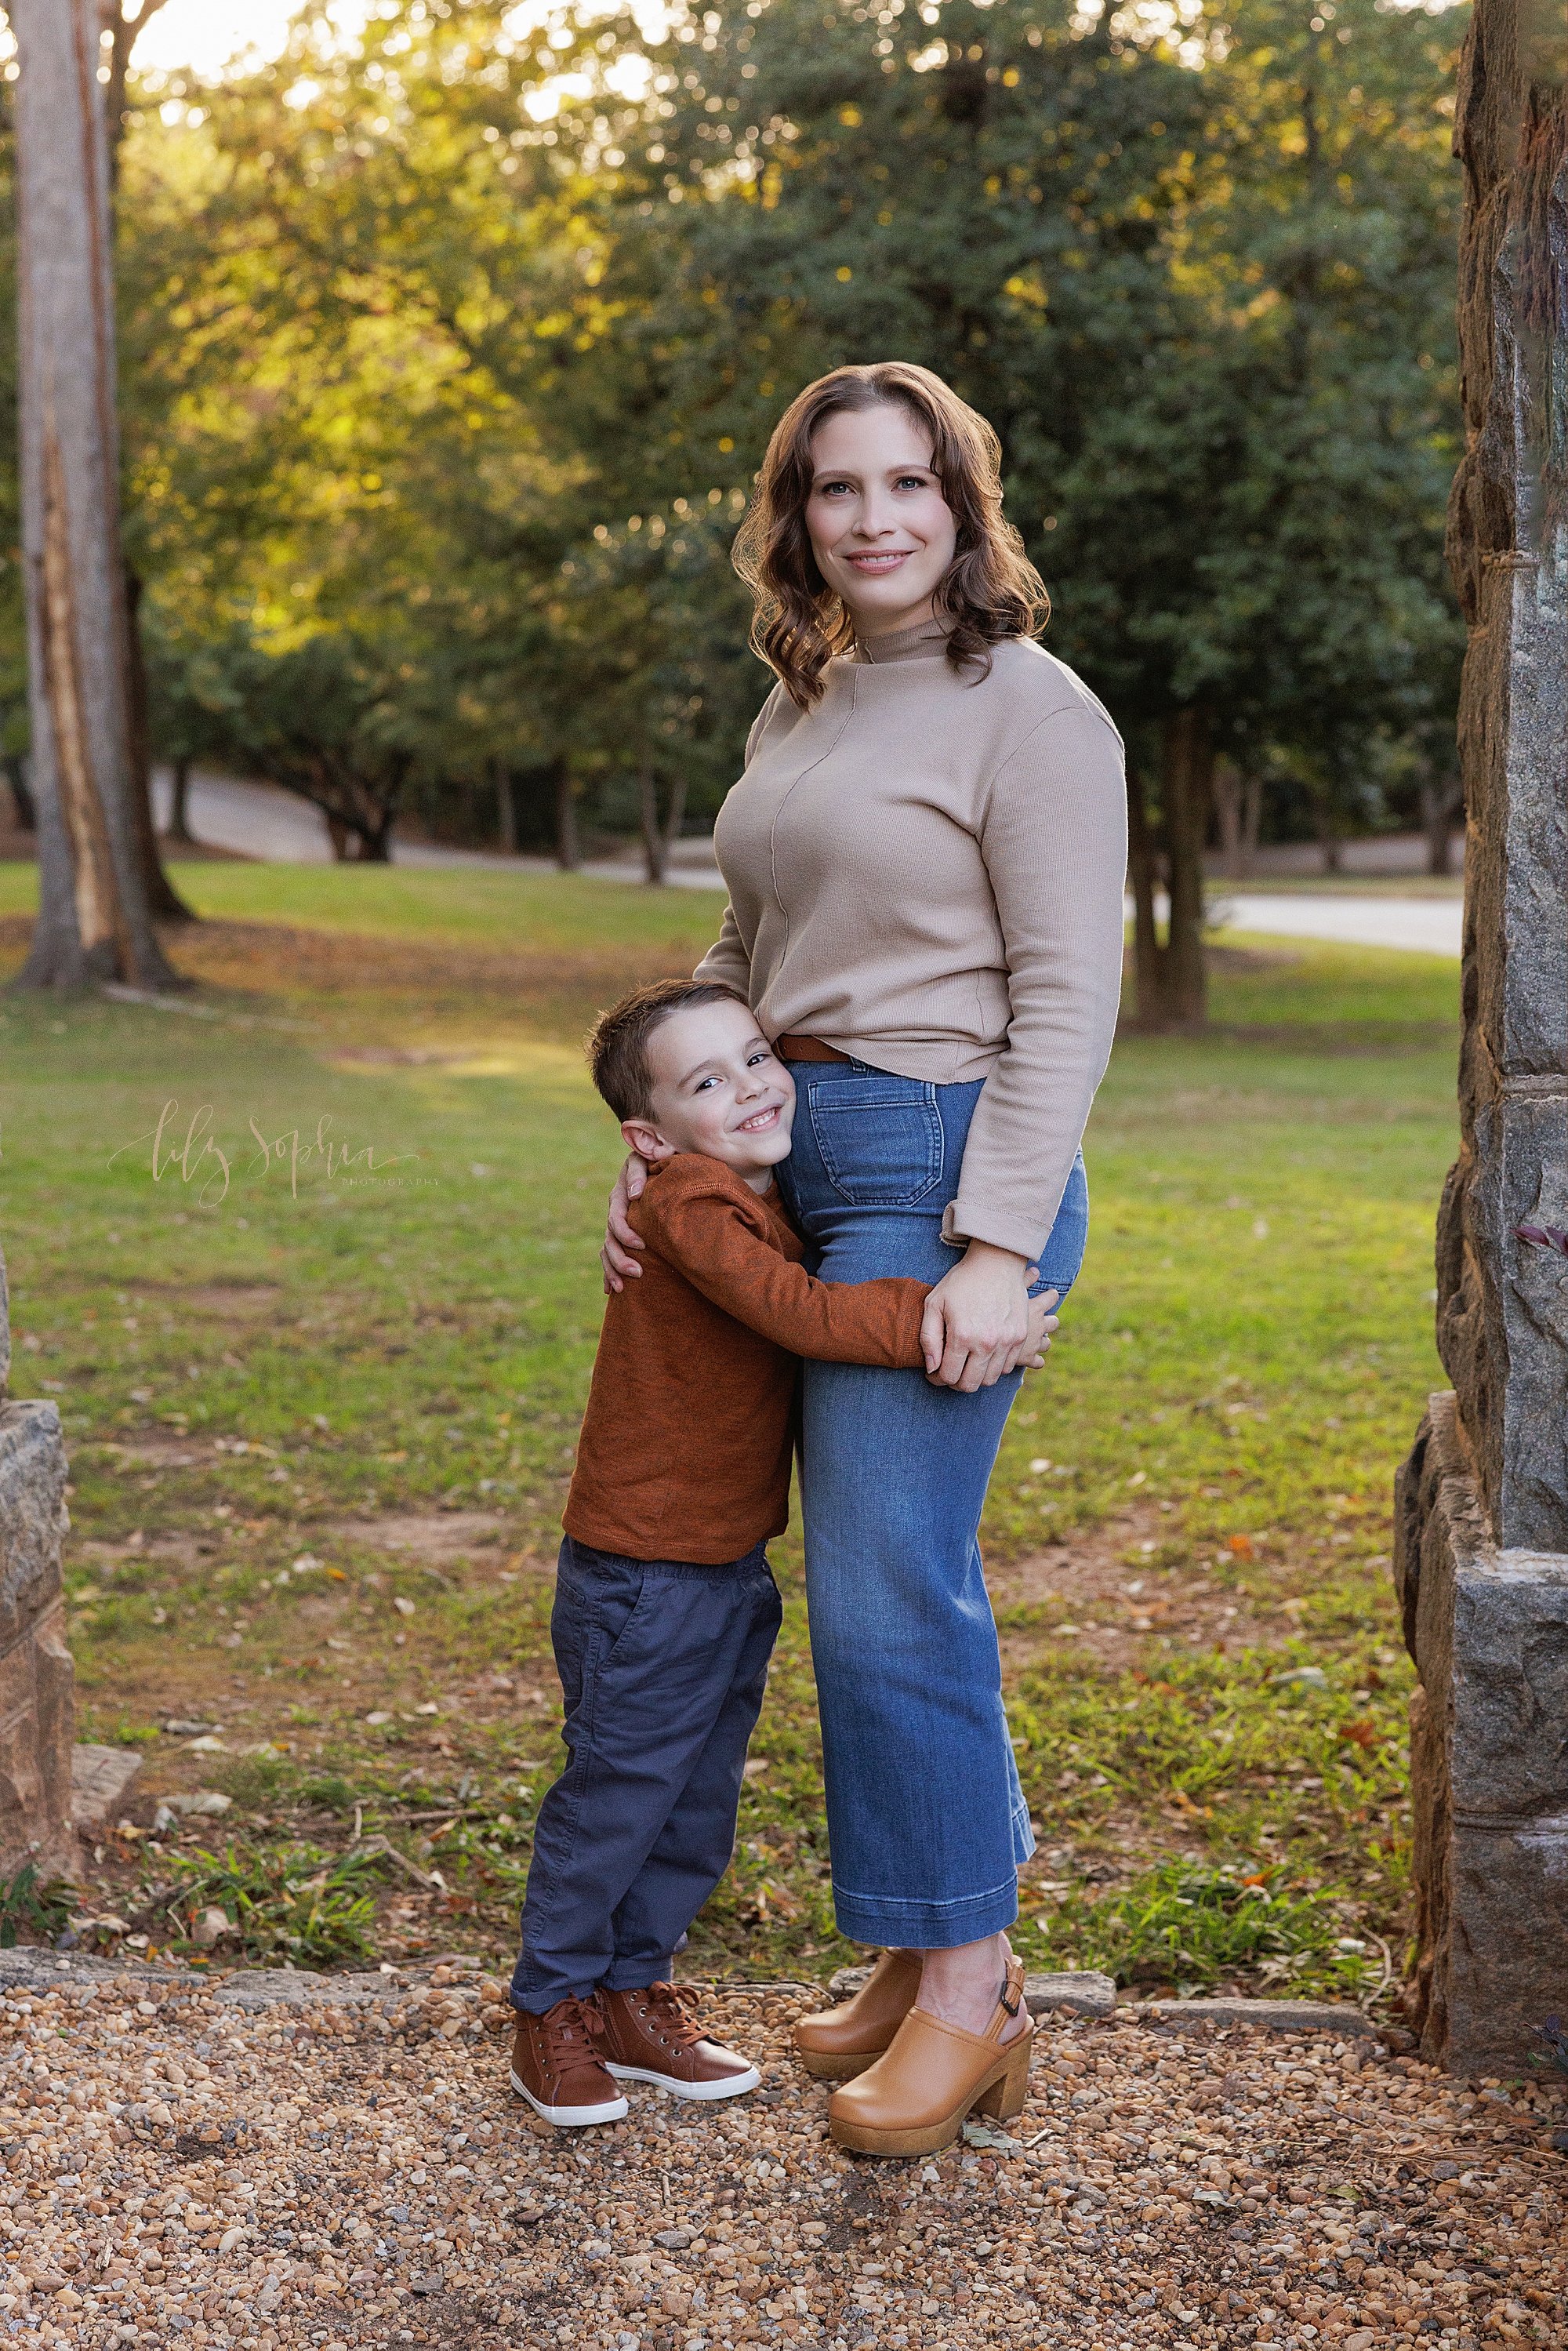 intown-atlanta-decatur-brookhaven-buckhead-outdoor-fall-pictures-family-photoshoot_5548.jpg